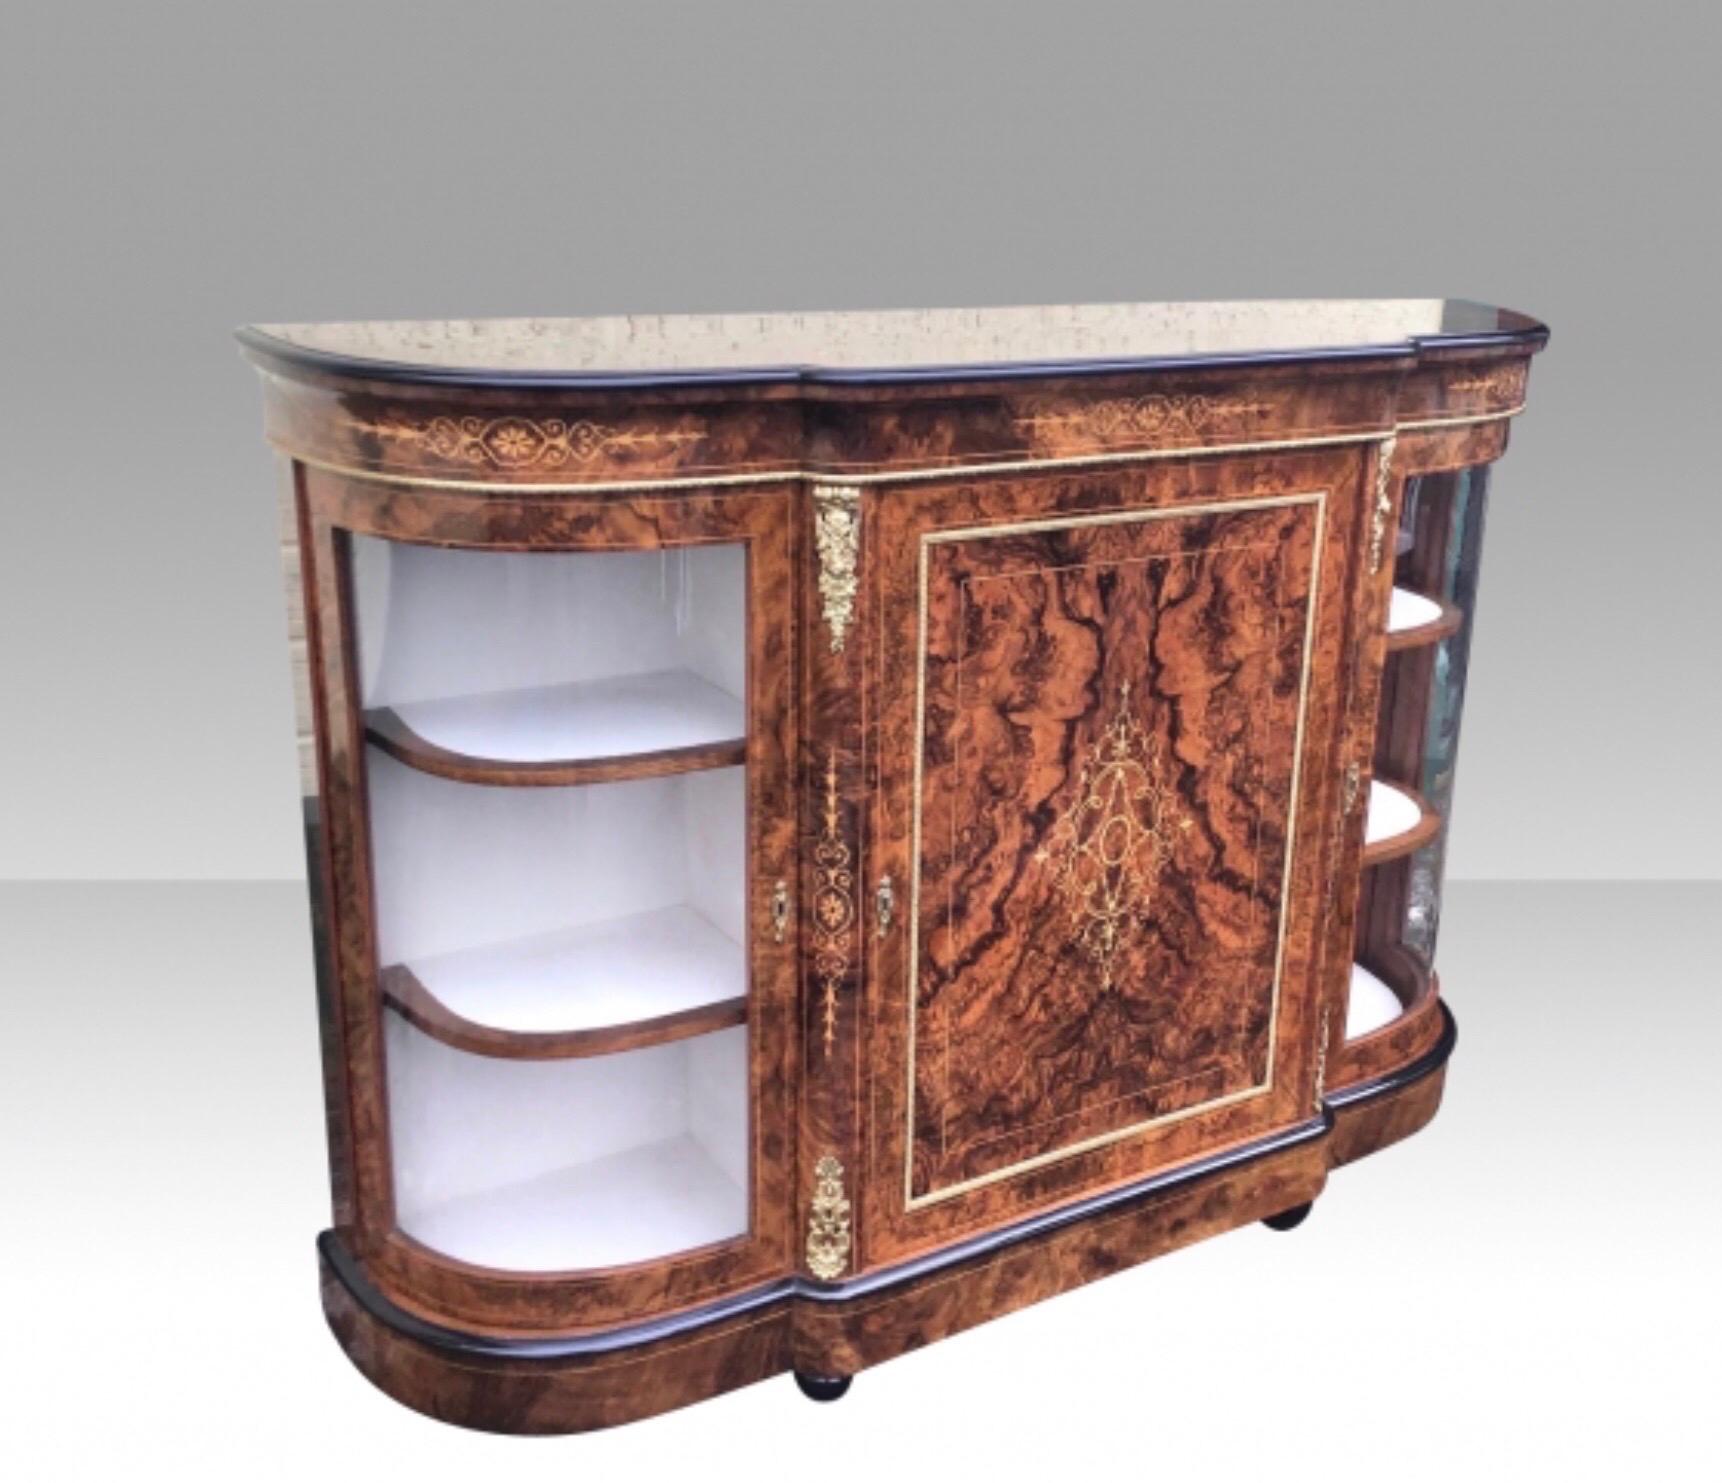 Fabulous exhibition quality figured and burr walnut antique credenza cabinet sideboard.
A stunning quality Victorian figured and burr walnut and gilt ormolu mounted antique credenza cabinet sideboard with central hinged door flanked by glazed bowed